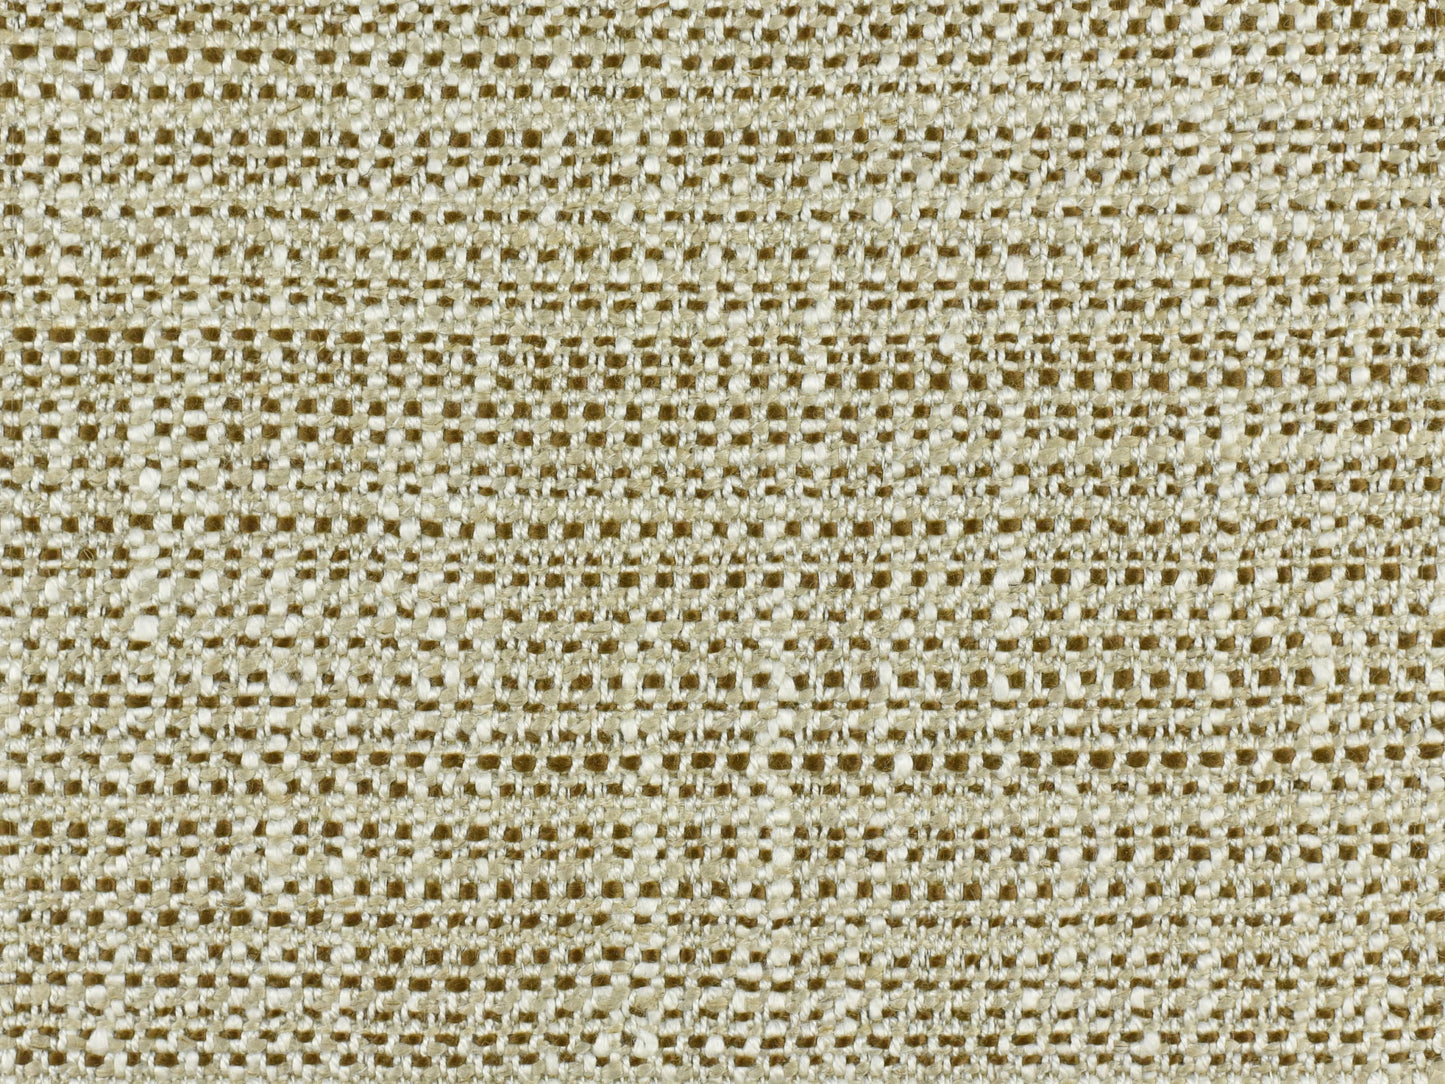 Heavy Duty Linen Blend Strip Woven Design Upholstery Fabric|Linen Fabric By The Yard|Modern Upholstery Fabric For Chair Pillow|57"W/750GSM Antique Brass